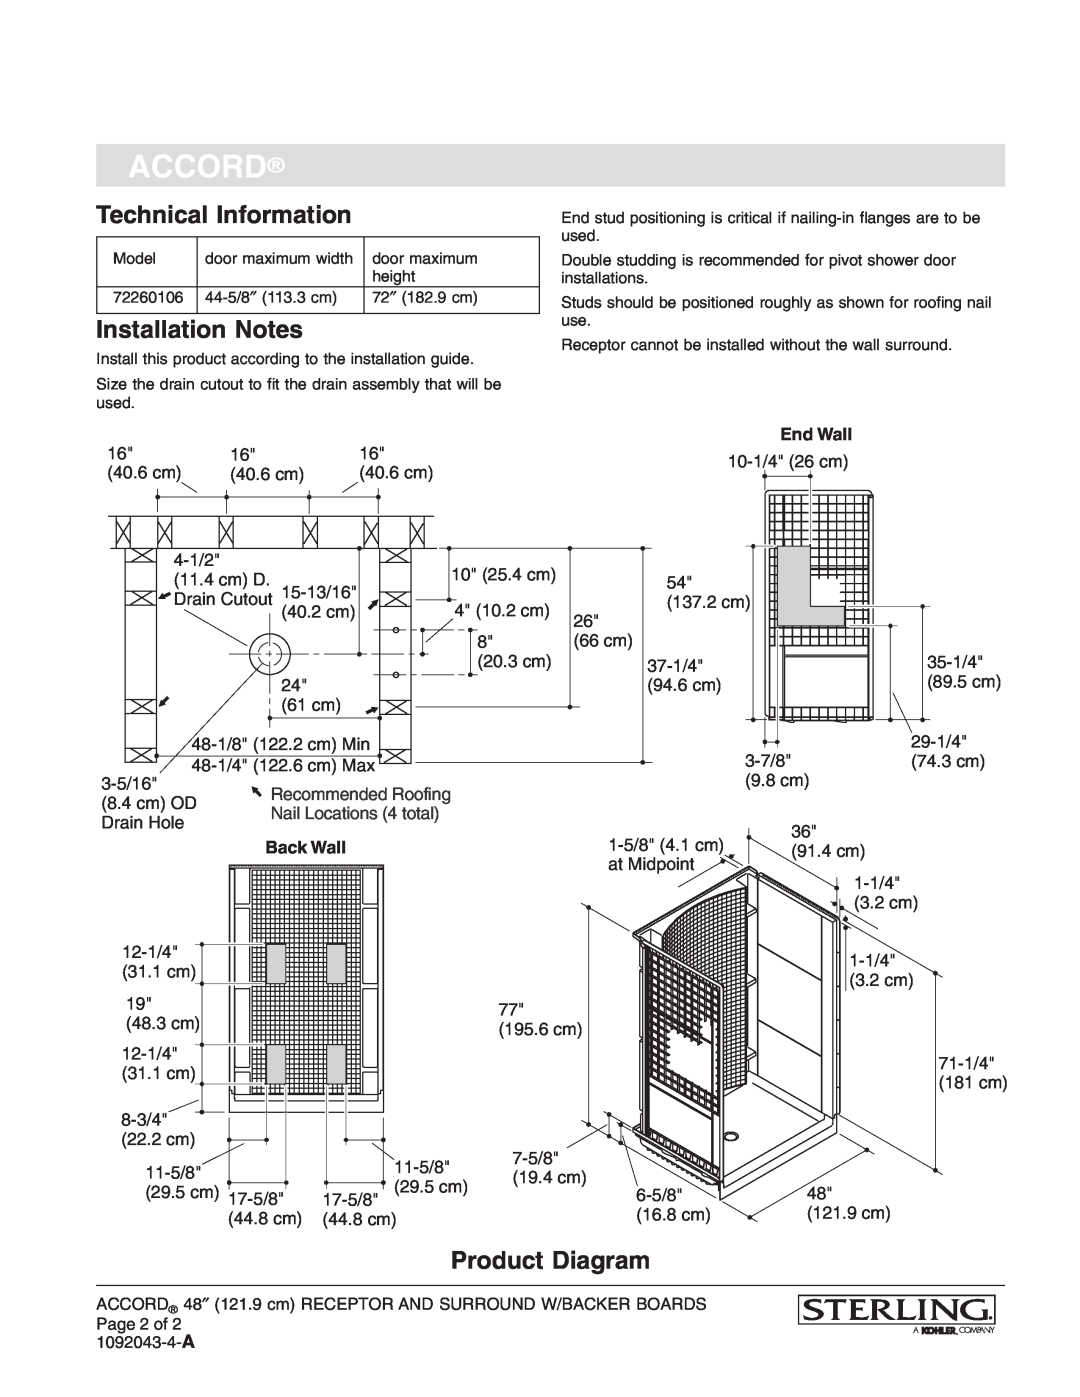 Sterling Plumbing 72260106 warranty Technical Information, Installation Notes, Product Diagram, End Wall, Back Wall, Accord 